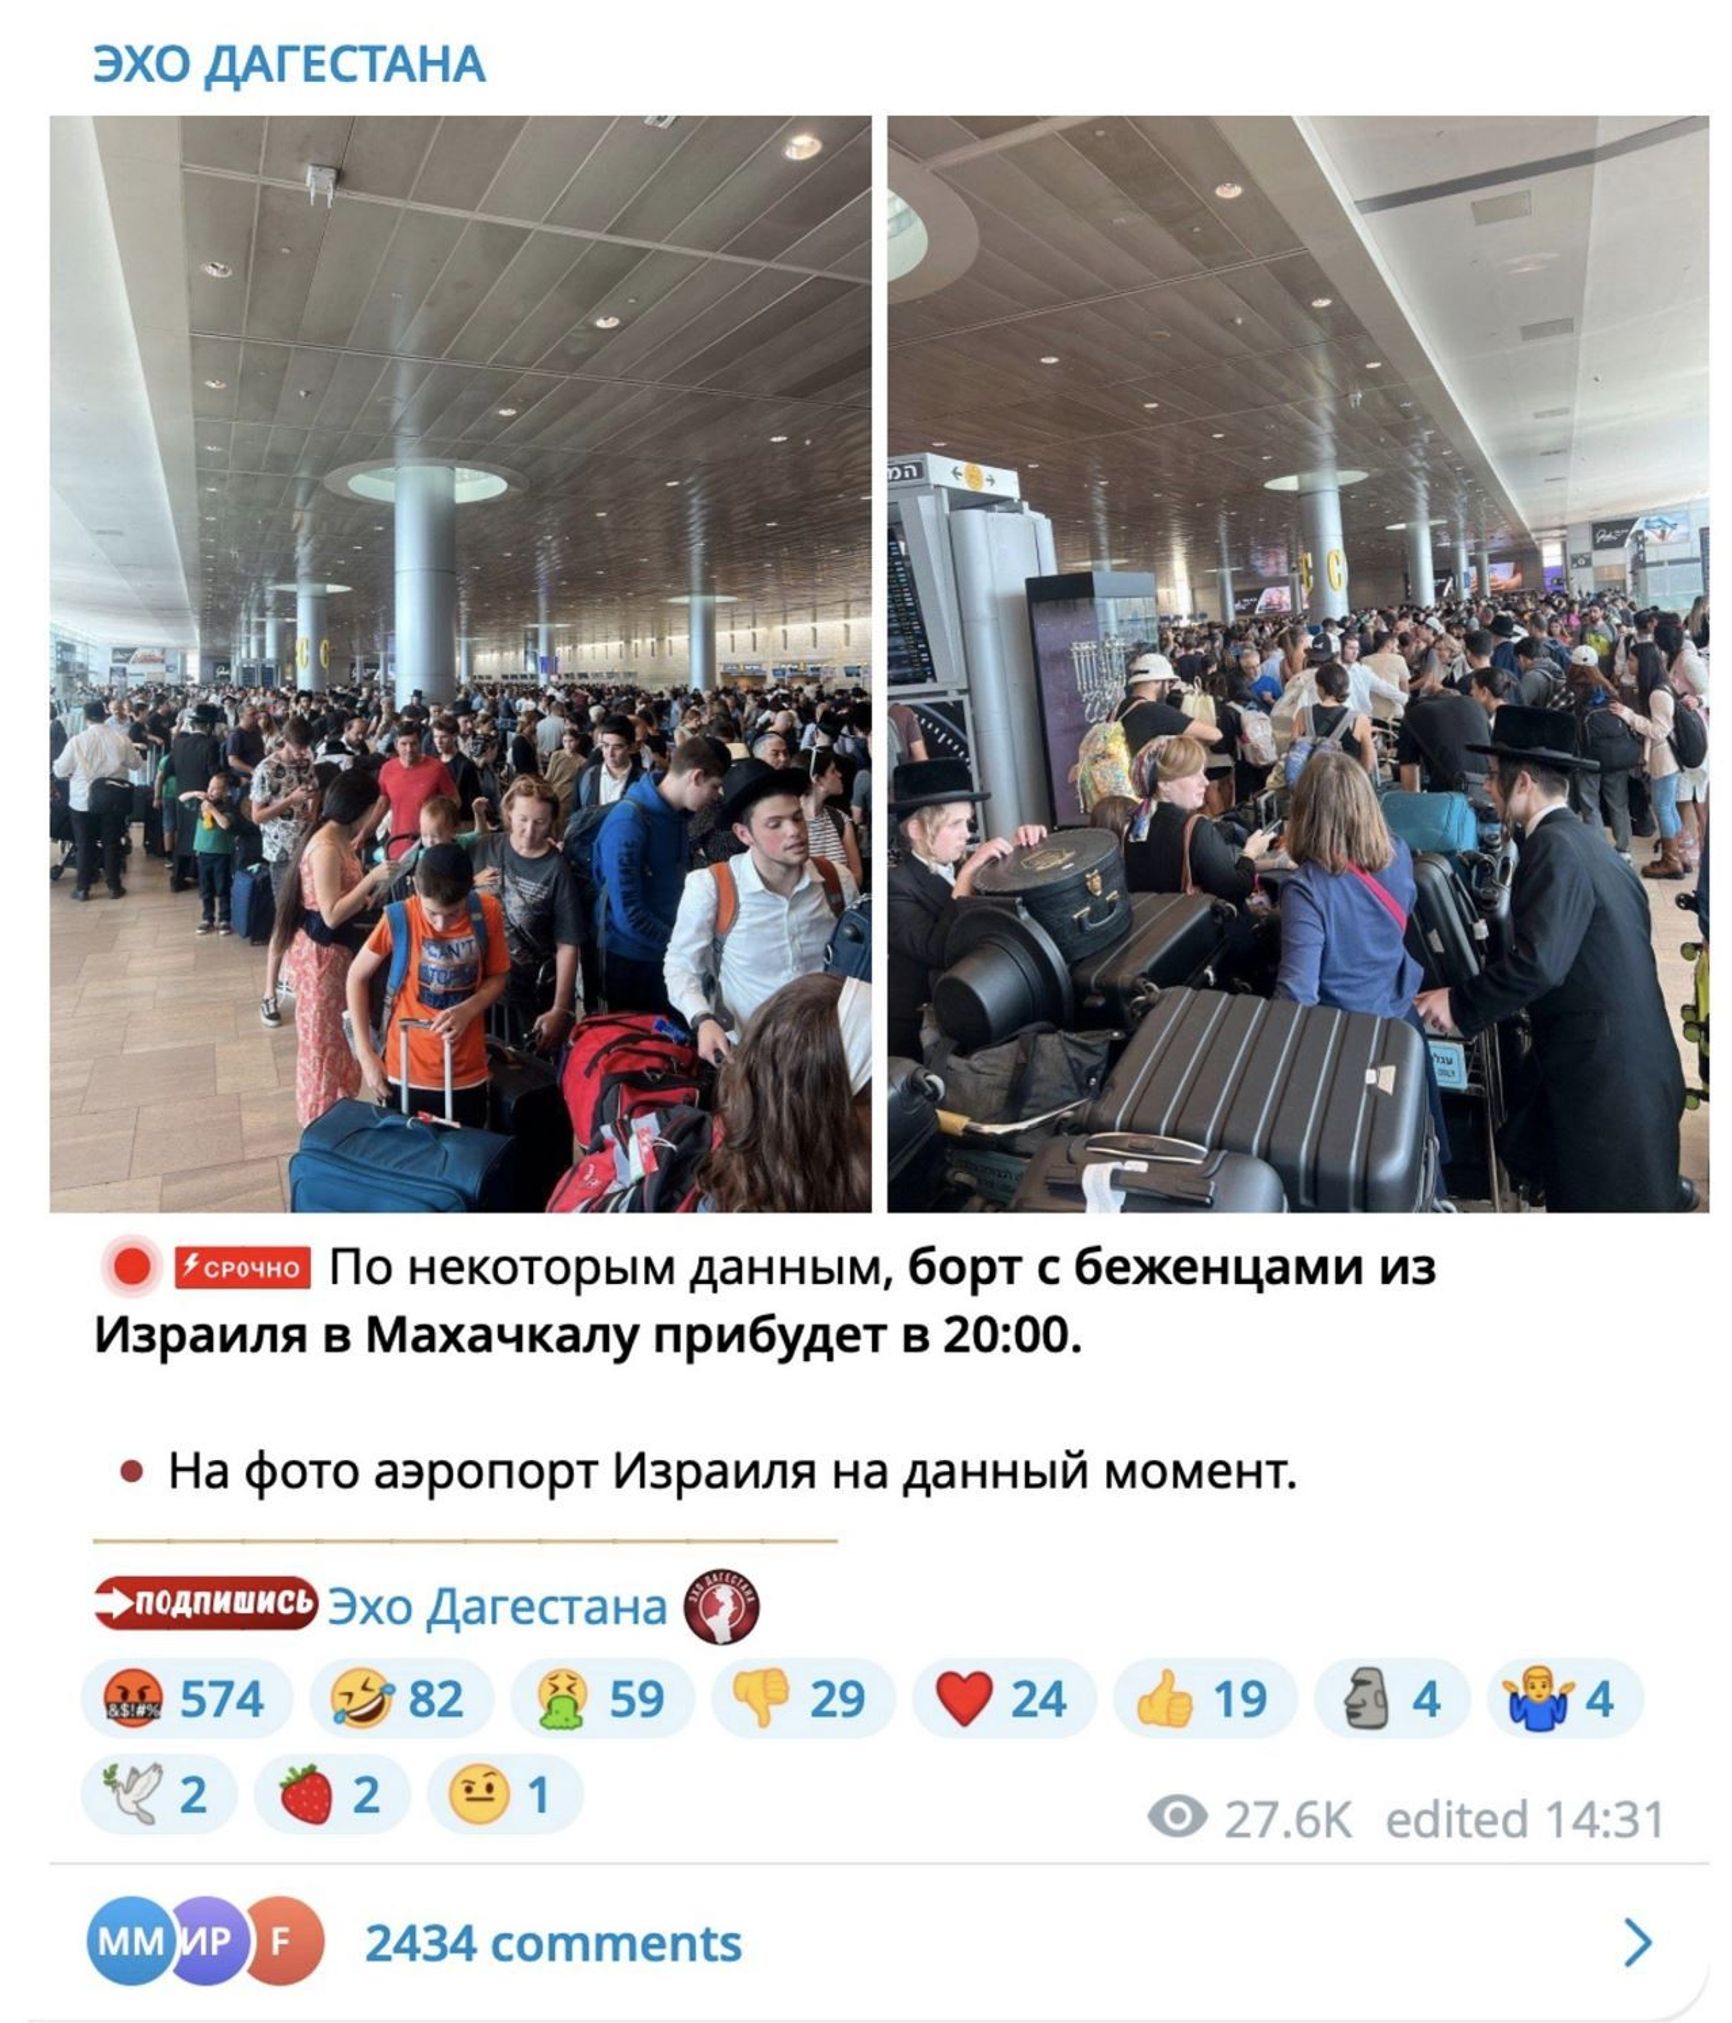 According to some reports, the flight with refugees from Israel will arrive in Makhachkala at 20:00. The photo shows the airport in Israel at the moment.